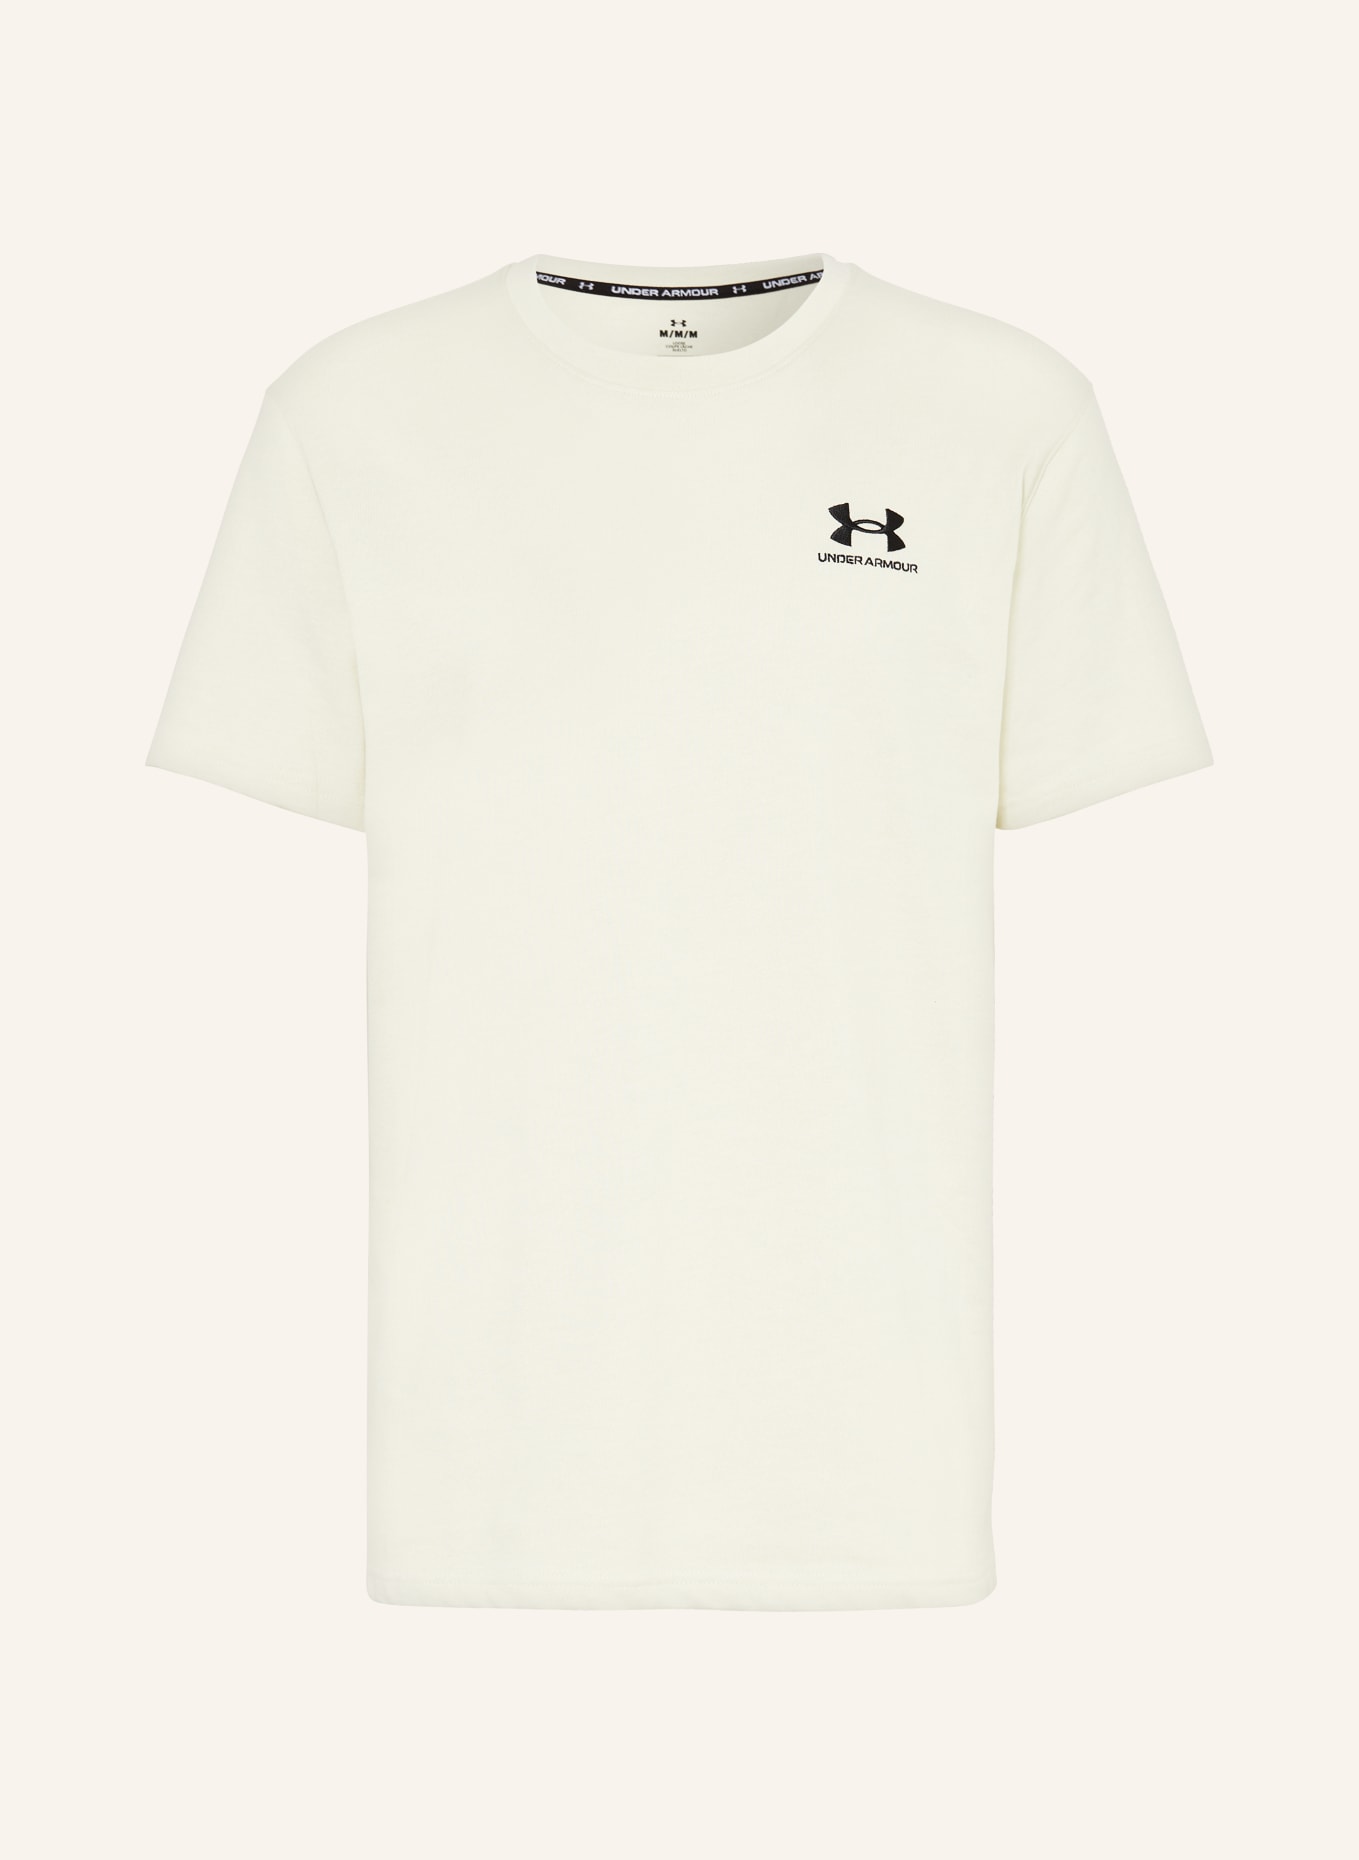 UNDER ARMOUR T-shirt HEAVYWEGHT, Color: LIGHT GREEN (Image 1)